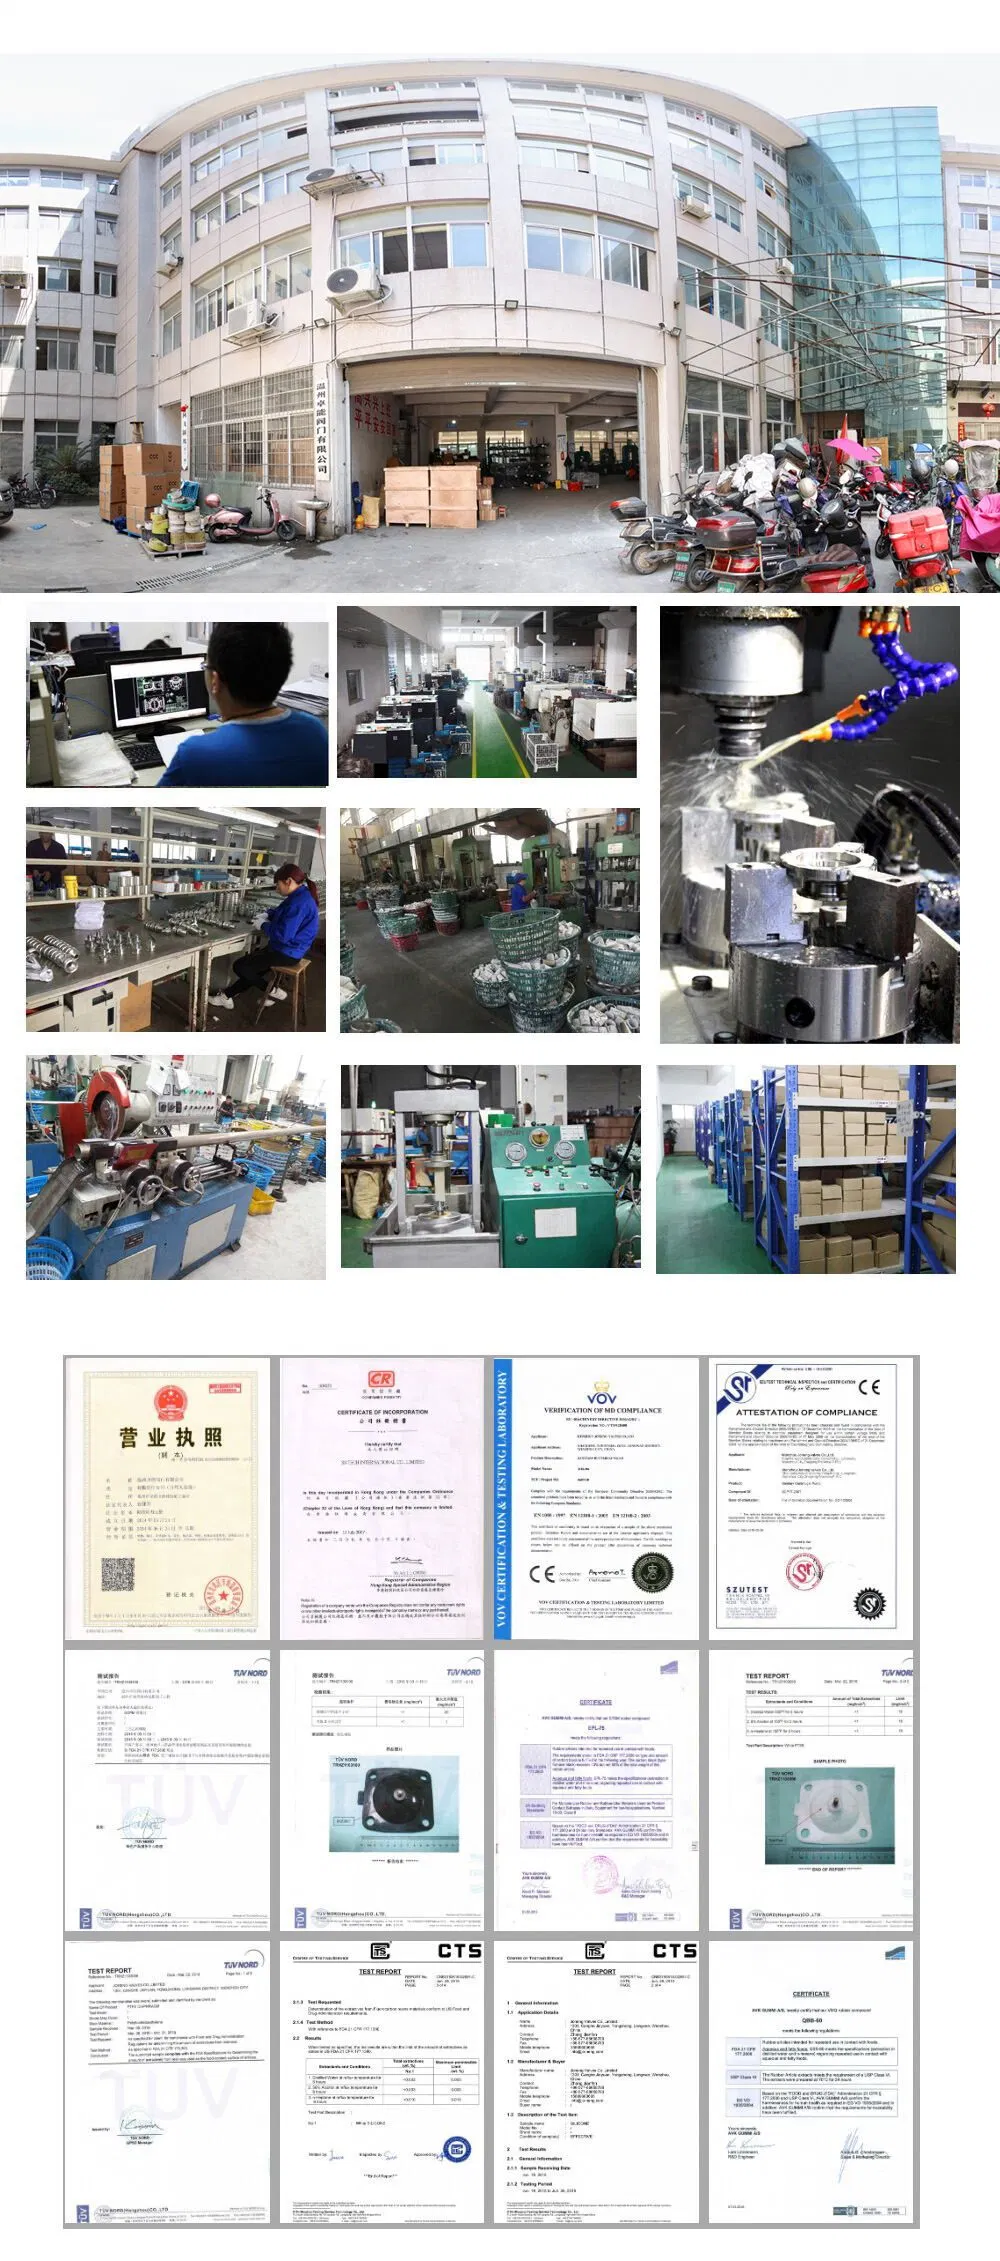 Bpe 2 Way Manuel Stainless Steel Sanitary Sanitaire Pneumatic Butterfly/Diaphragm/Safety Relief/Non Return/Check/Angle Seat/Ball Control Valve (JN-BV1001)